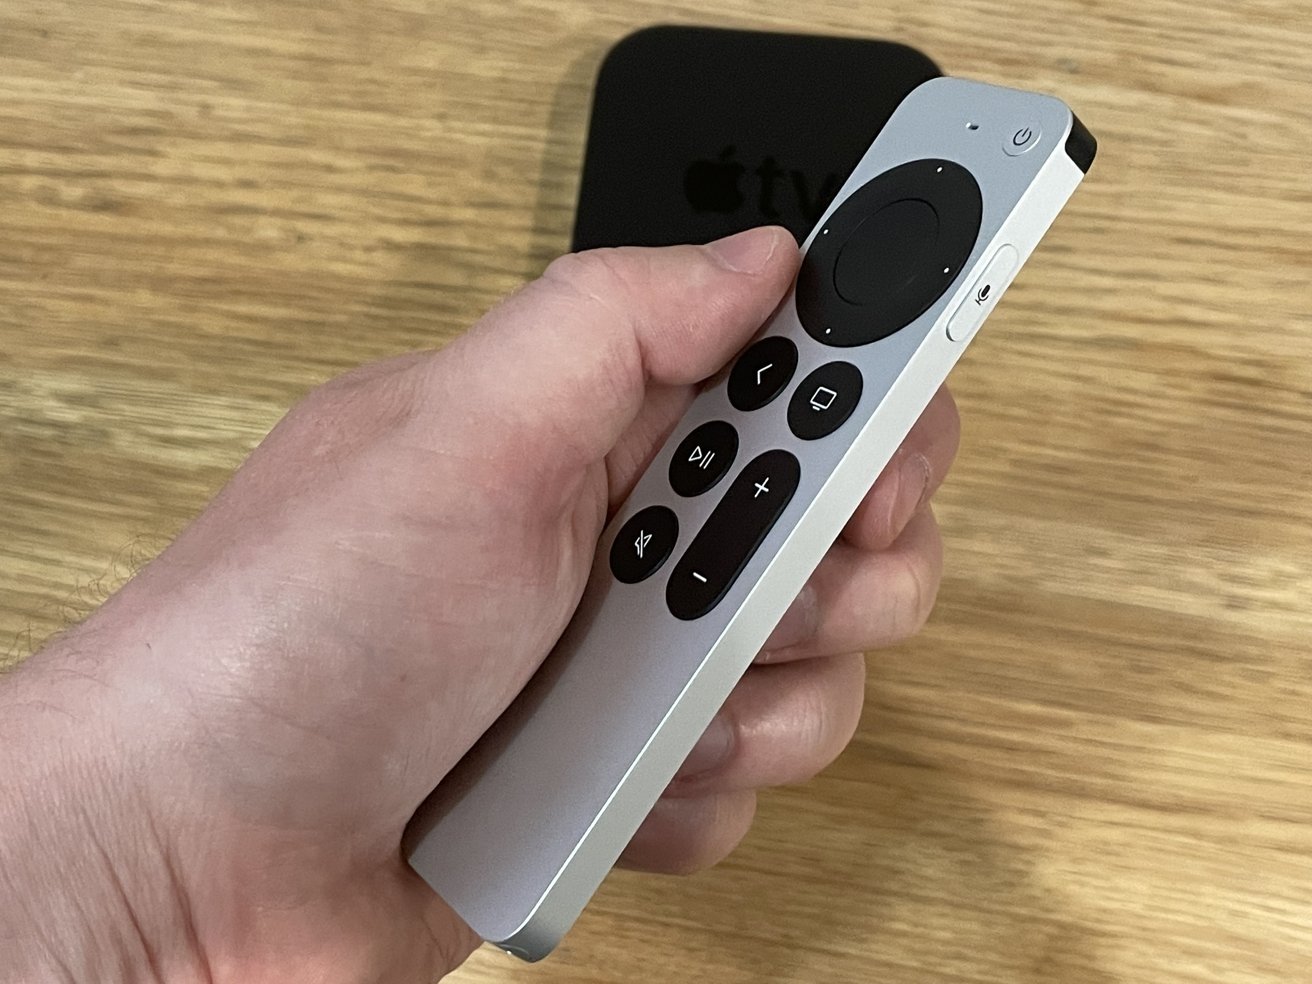 Apple's Siri Remote is included with the new Apple TV 4K